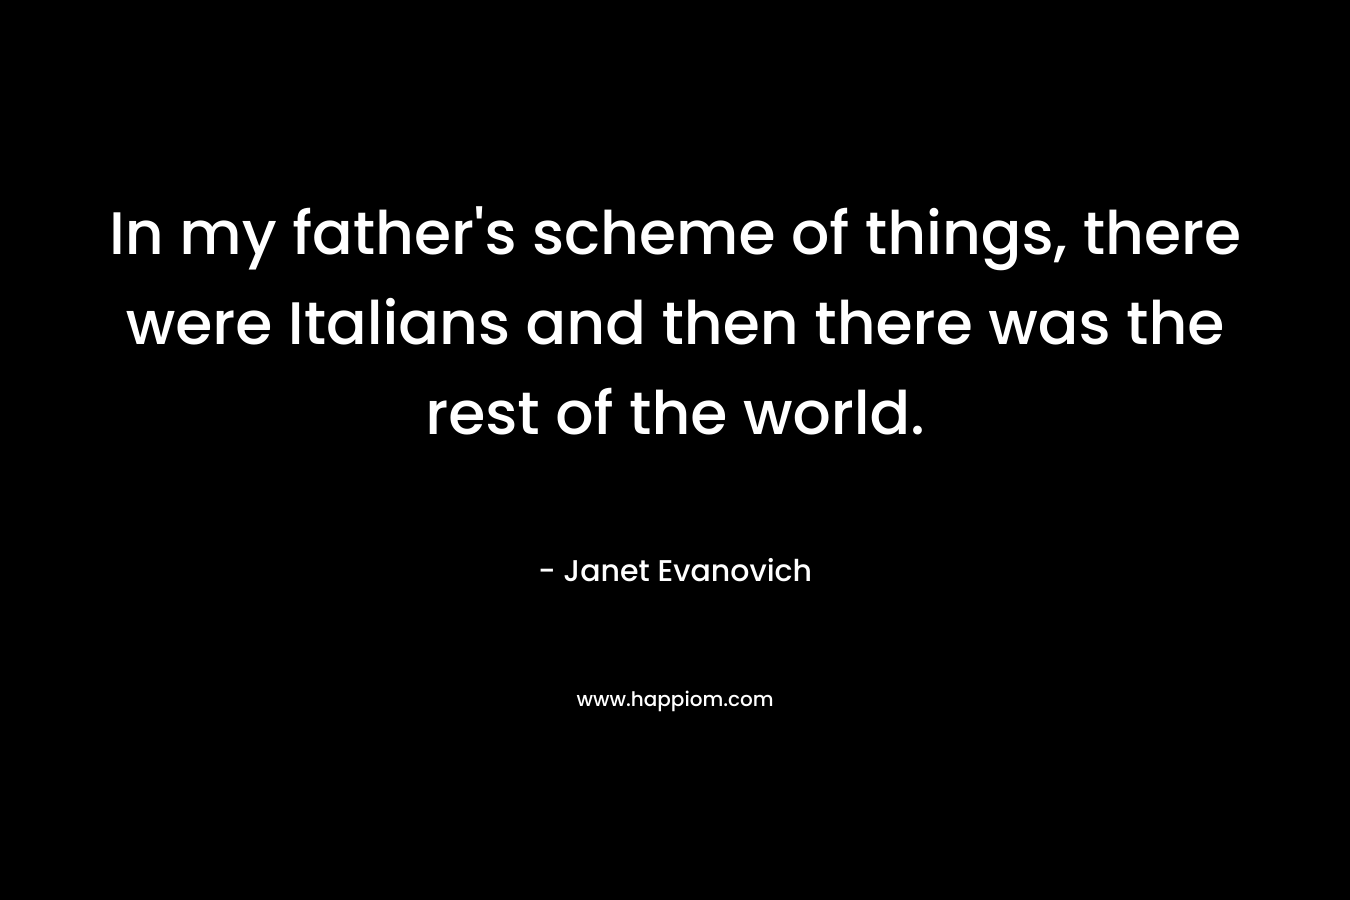 In my father’s scheme of things, there were Italians and then there was the rest of the world. – Janet Evanovich